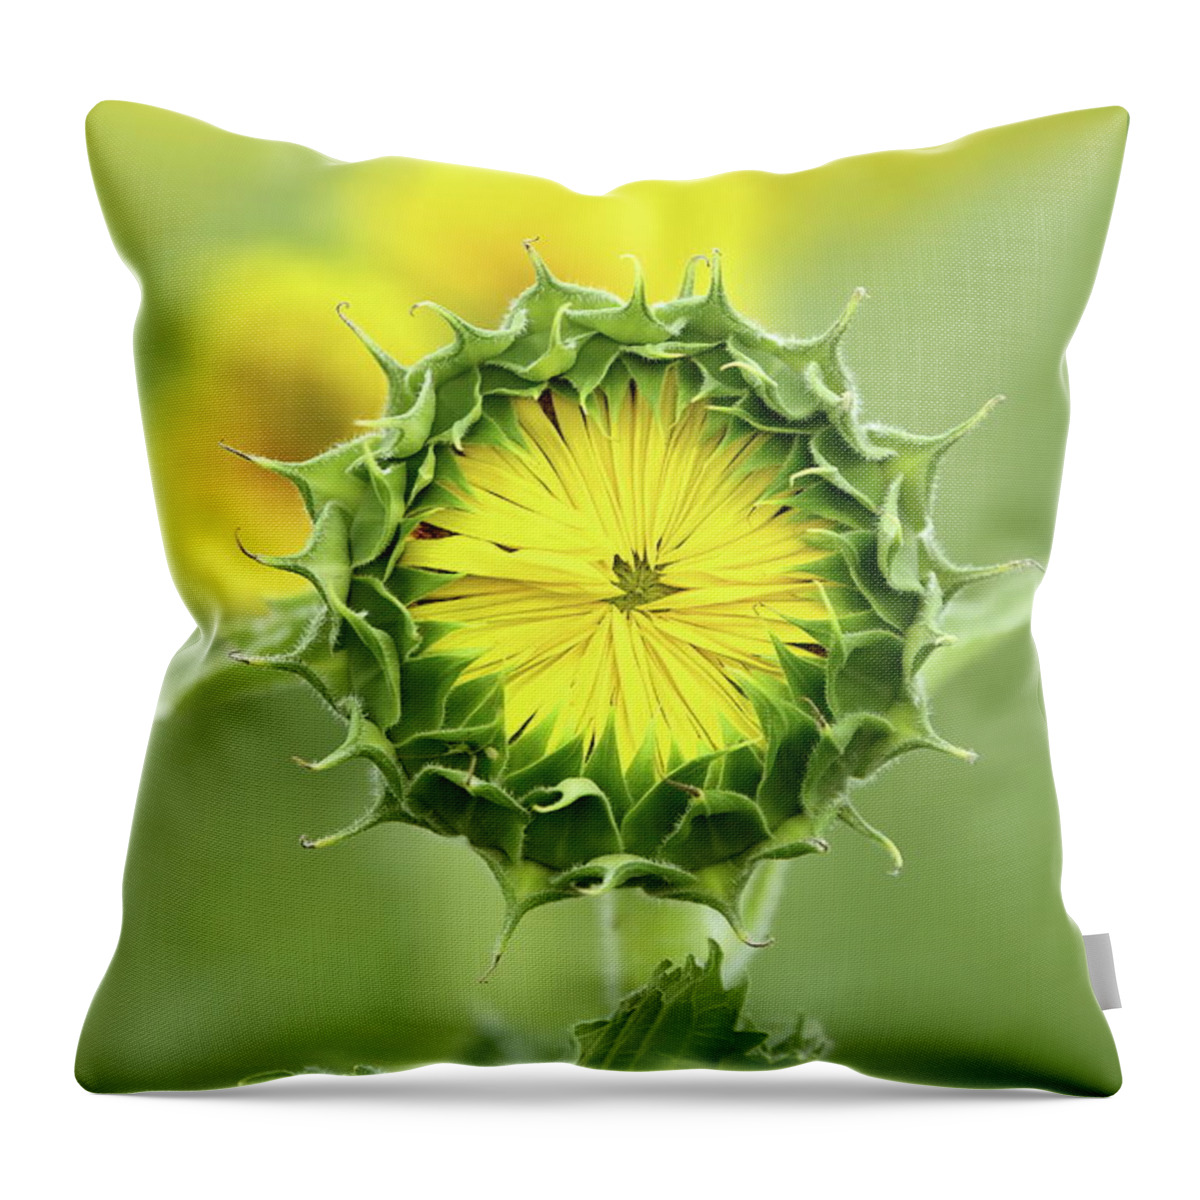 Sunflower Throw Pillow featuring the photograph Time To Wake Up by Lens Art Photography By Larry Trager